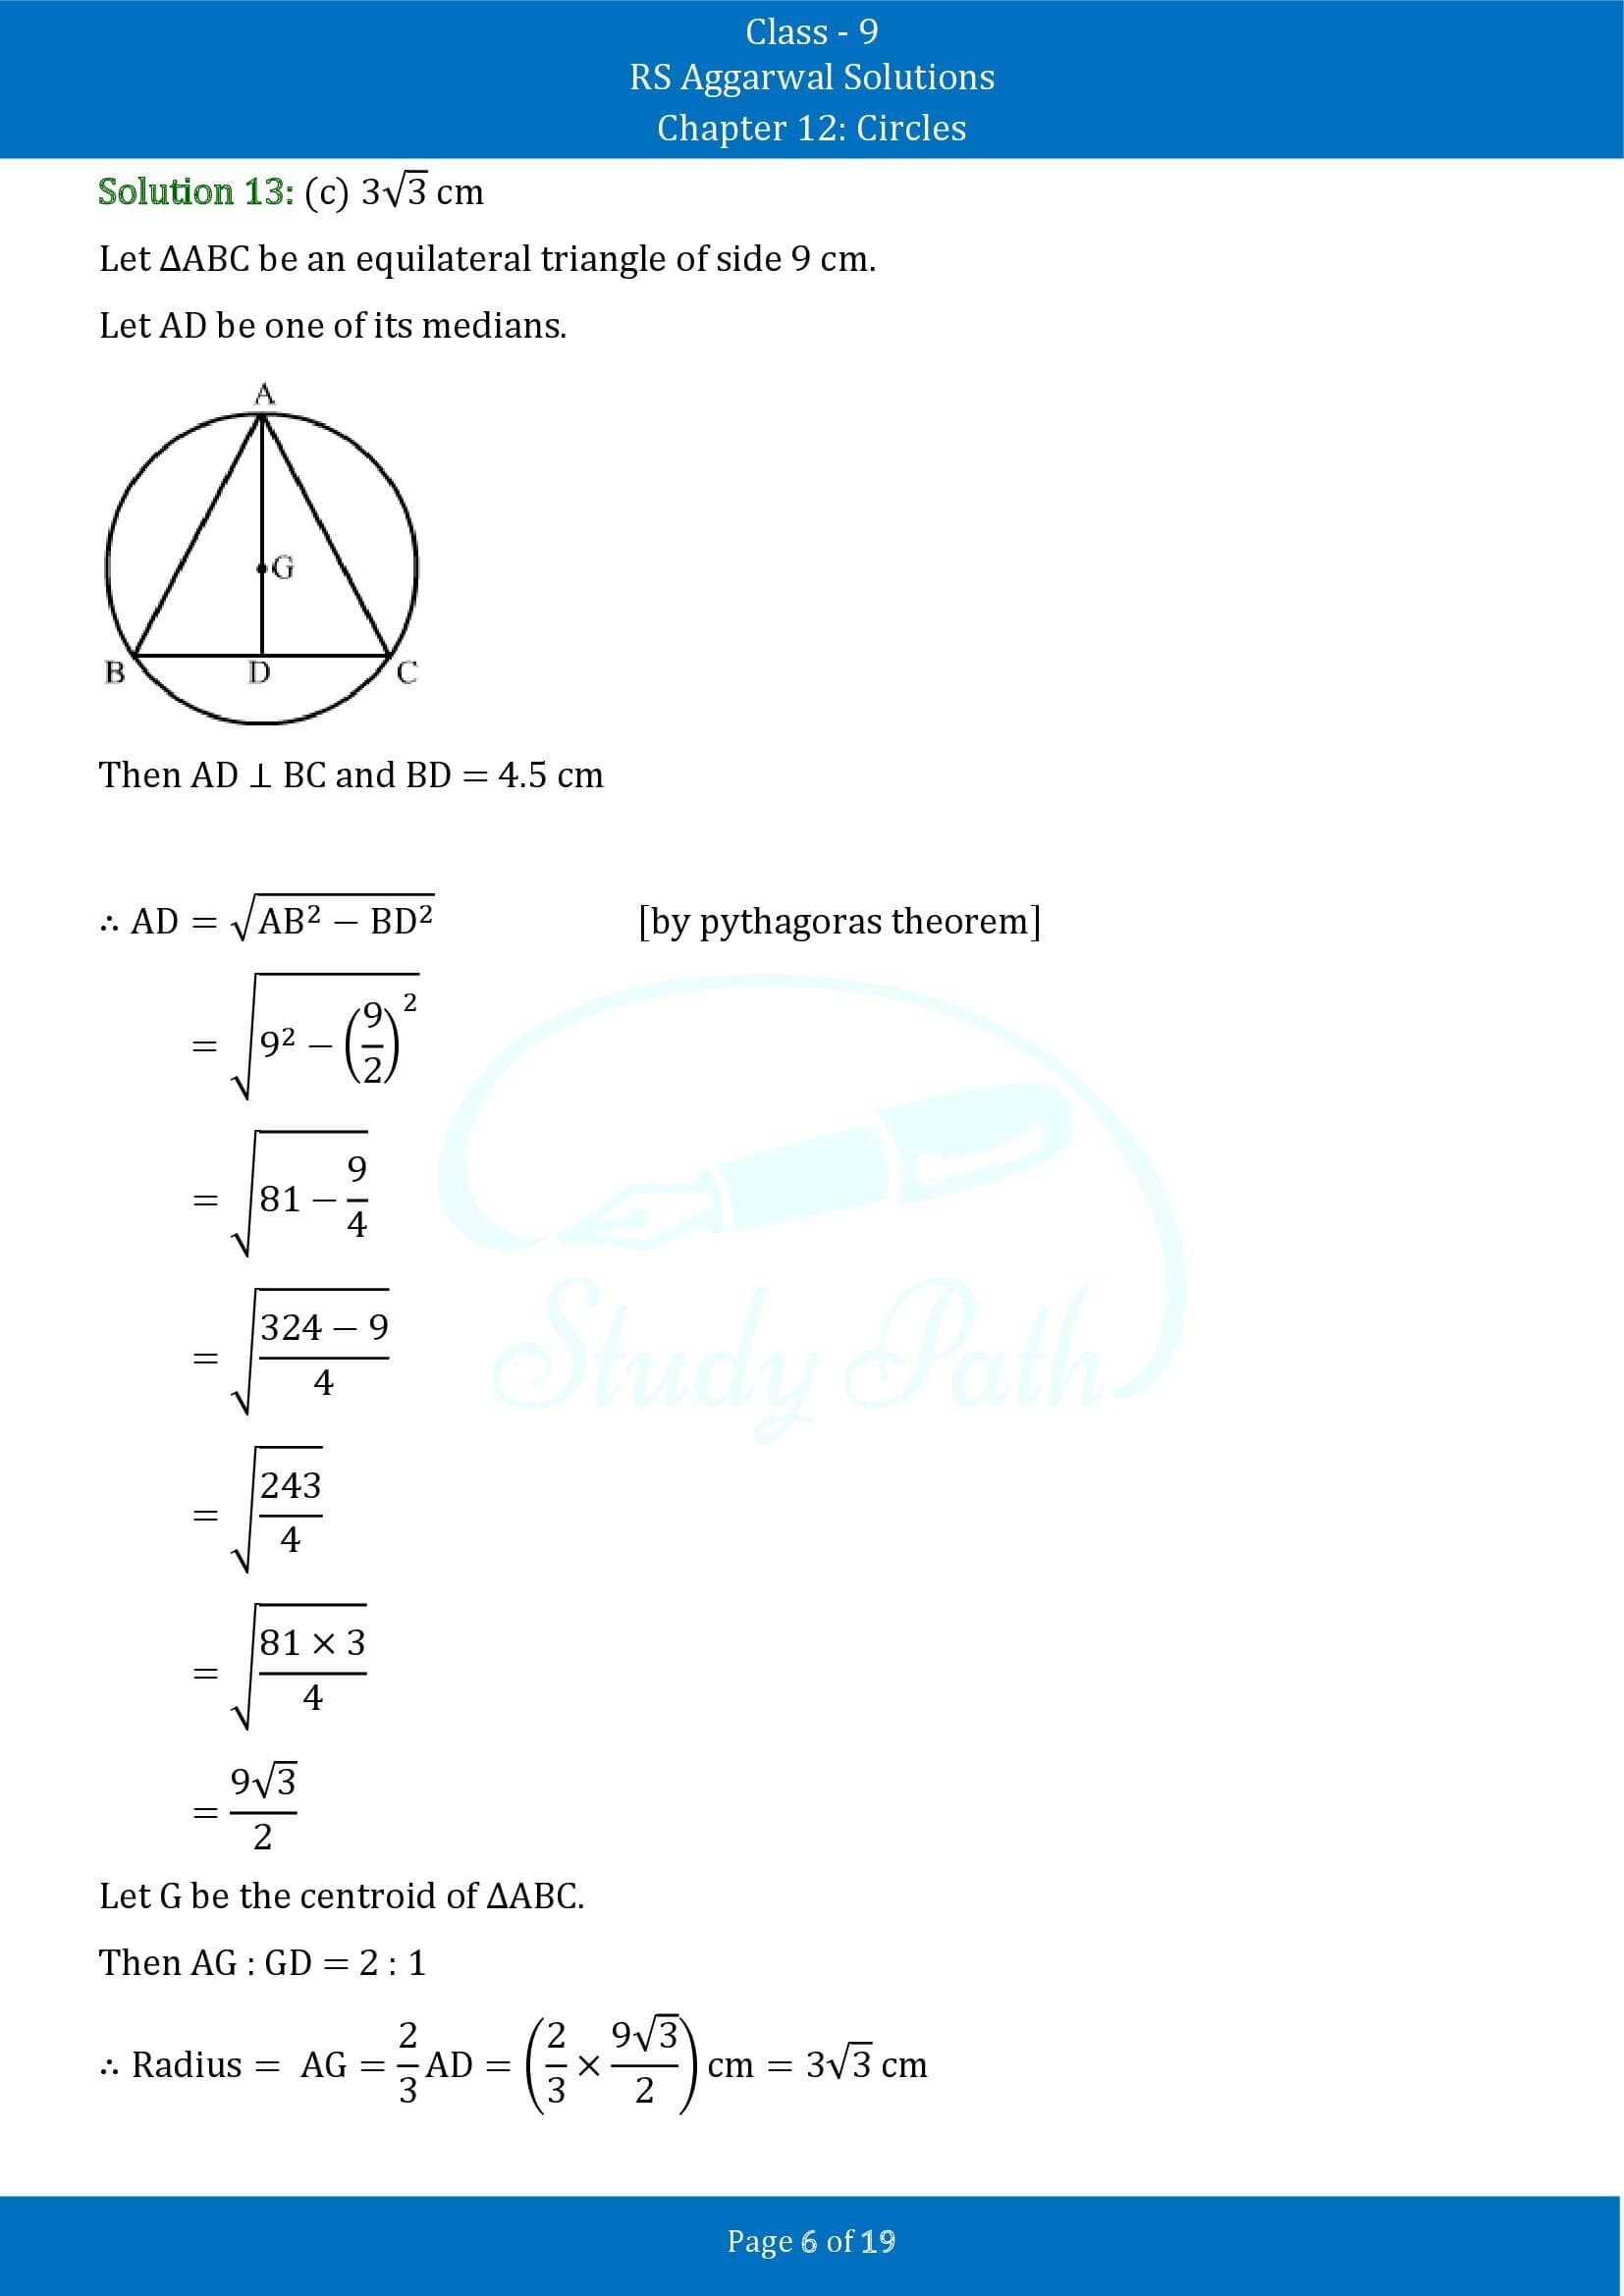 RS Aggarwal Solutions Class 9 Chapter 12 Circles Multiple Choice Questions MCQs 00006